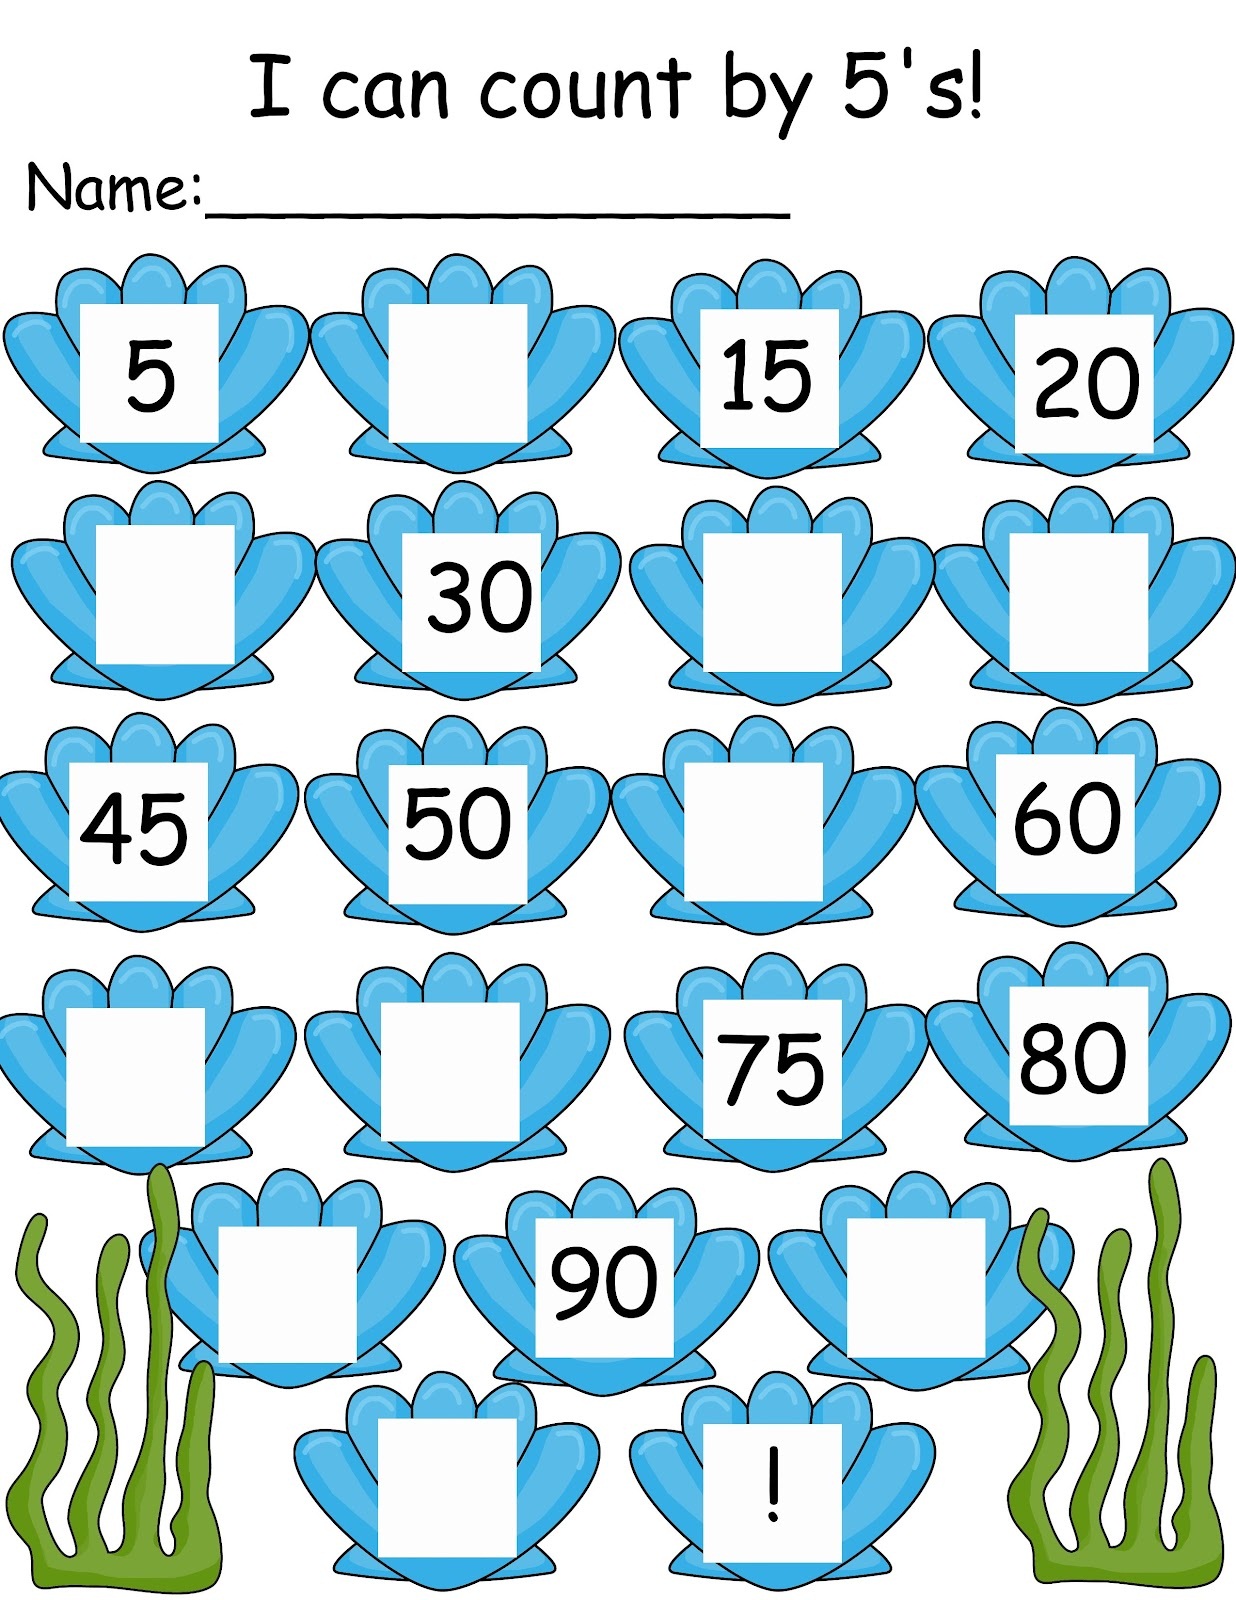 Count by 22s Worksheets Printable  Activity Shelter Within Counting By 5s Worksheet